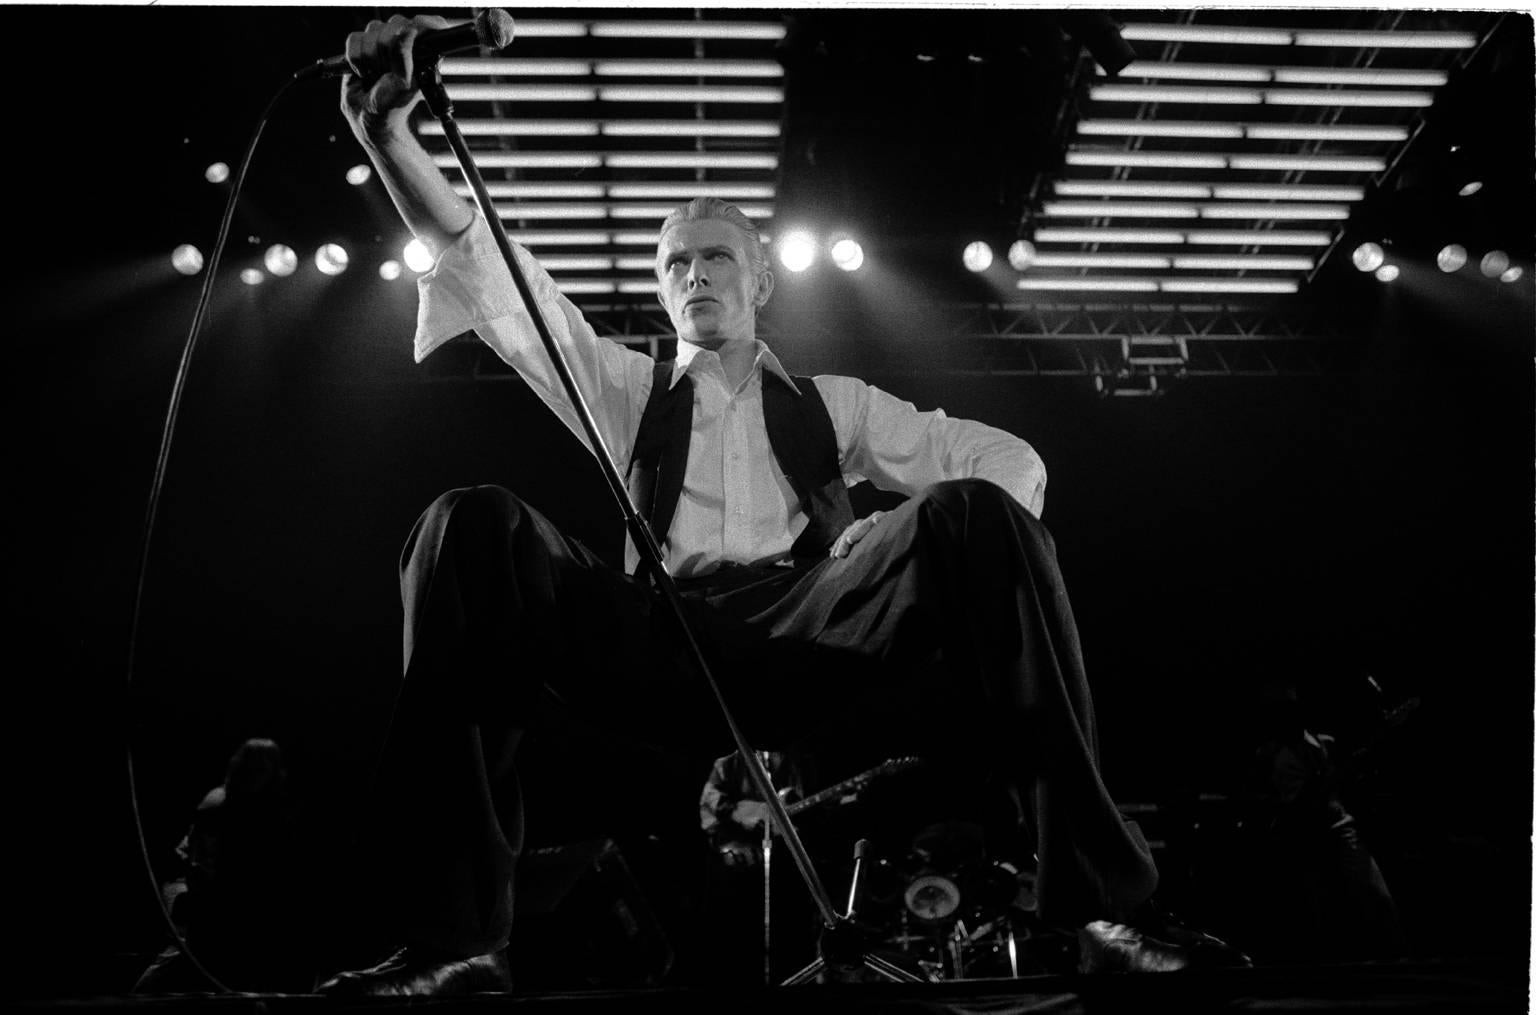 Michael Putland Black and White Photograph - 'David Bowie On Stage At Wembley' 1976  (Signed)